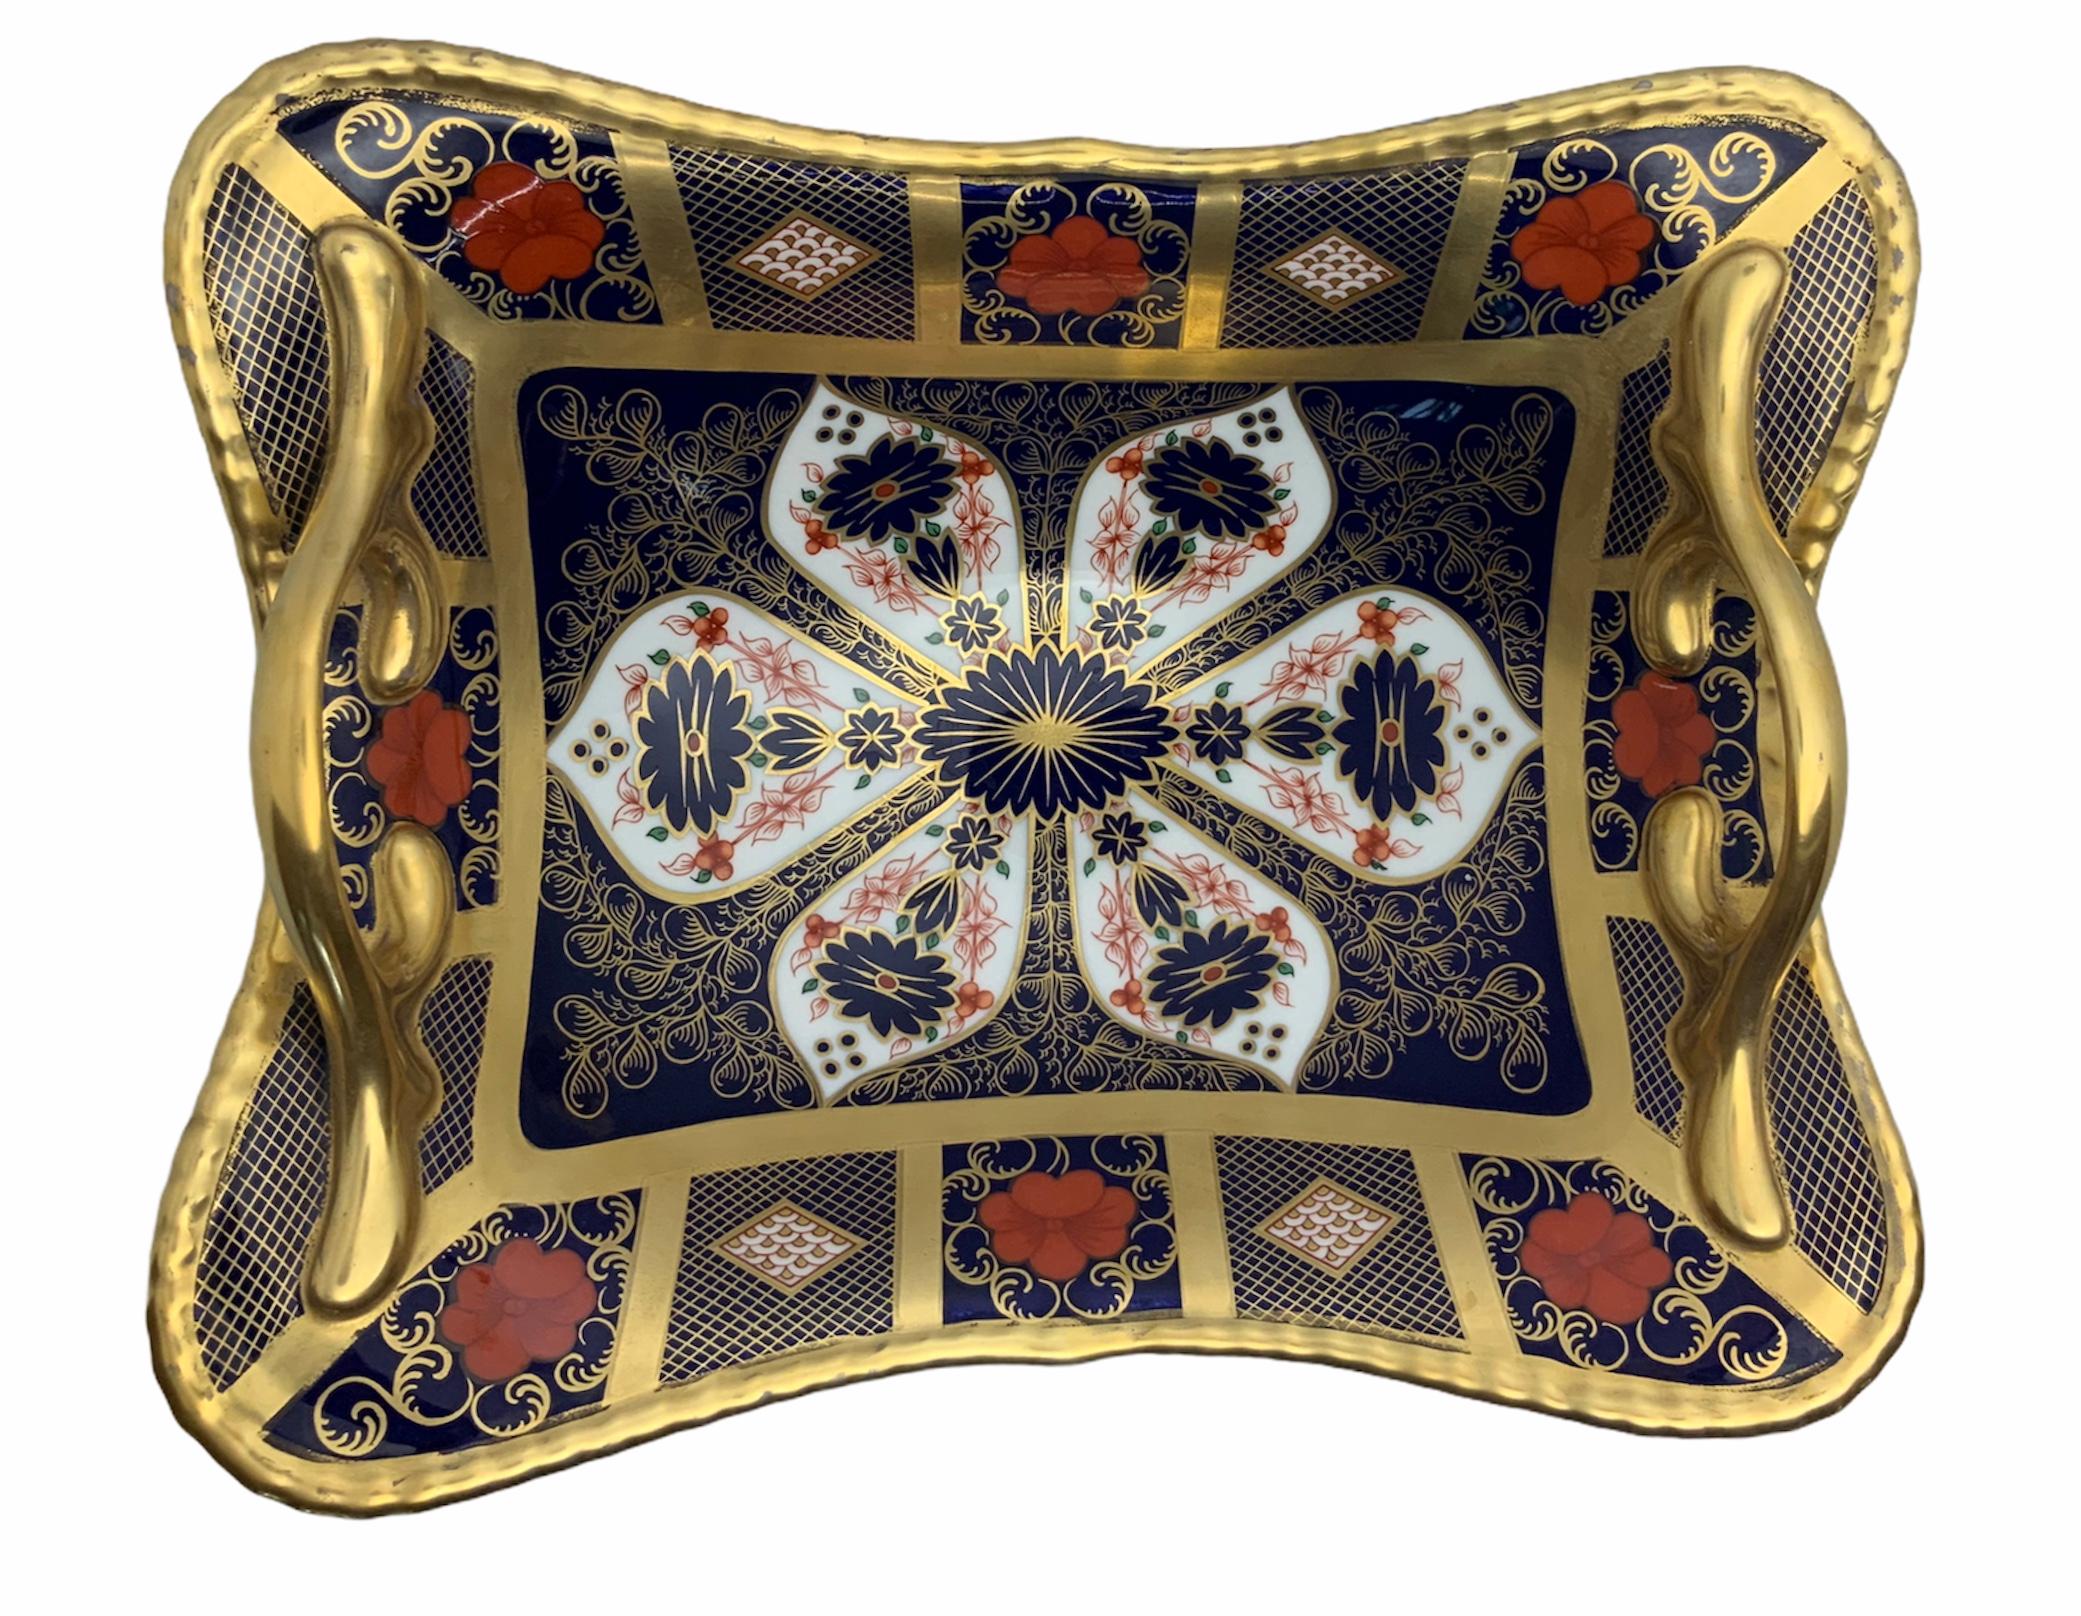 This is a Royal Crown Derby hand painted porcelain basket shaped as a concave parallelogram supported by a round base. It is hand painted in bright red, black, white and 22 carat gold. In the rectangular center predominates a large flower with a